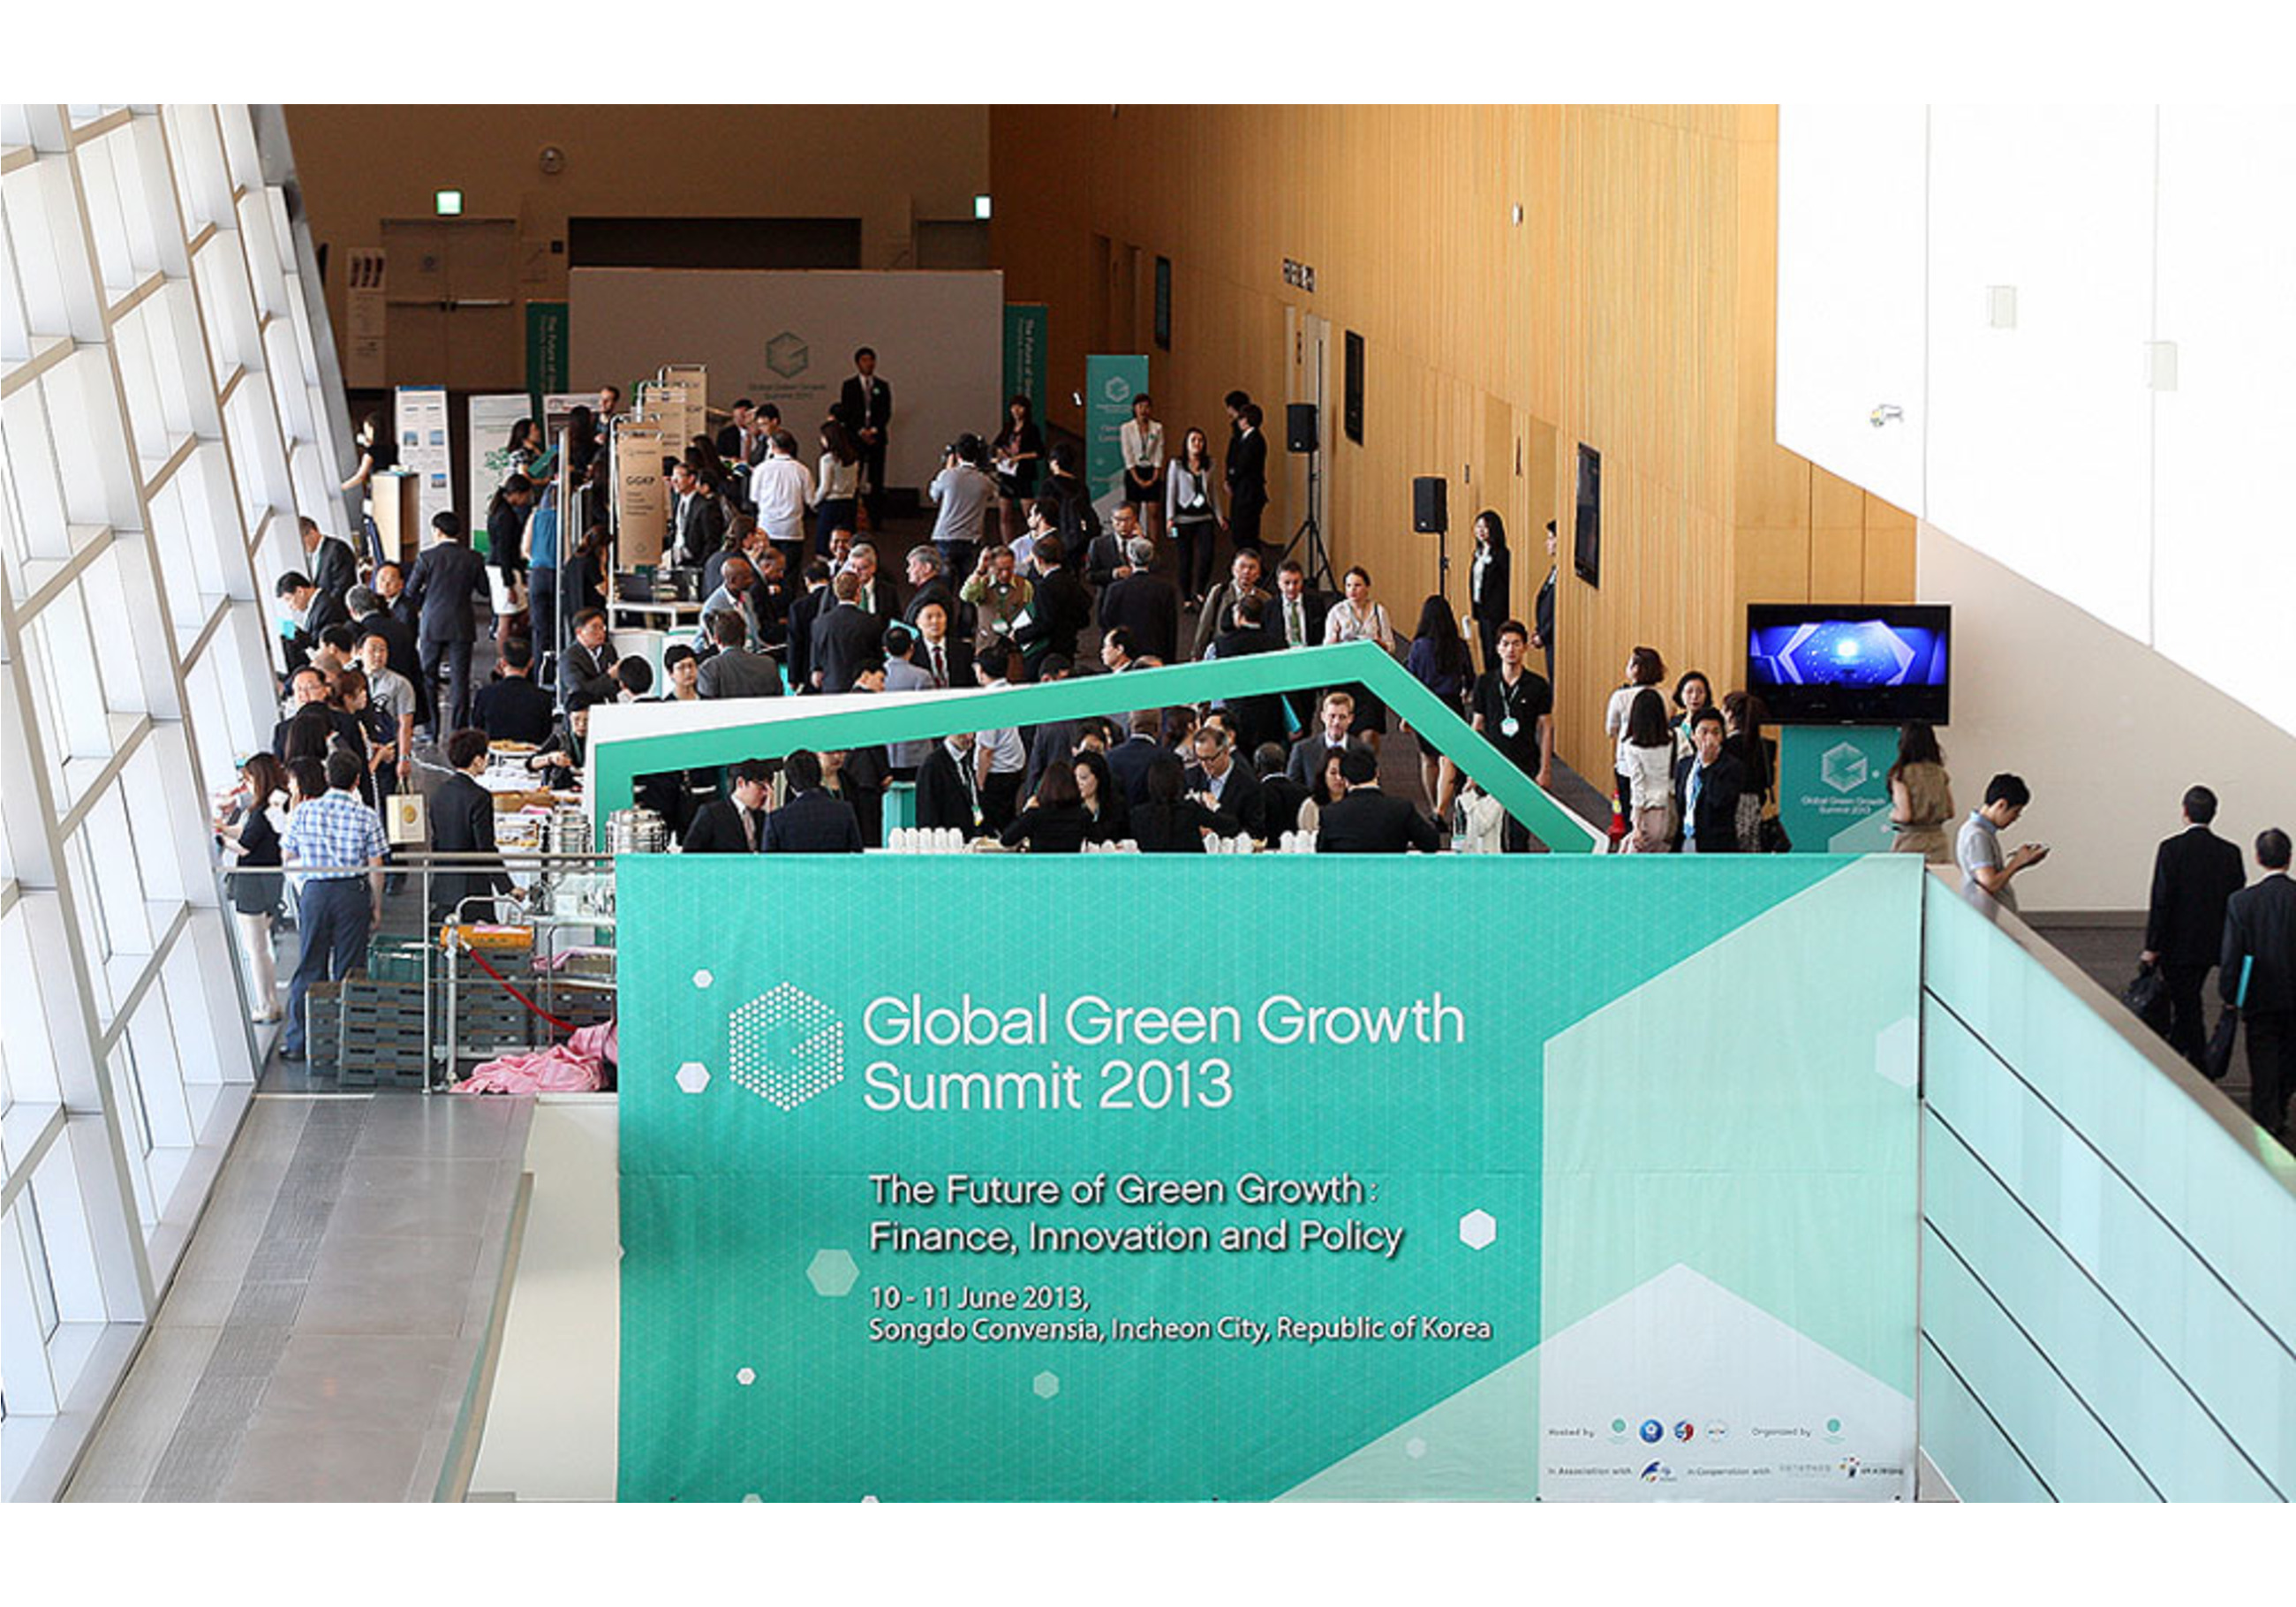 Global Green Growth Institute – New UNICC Client